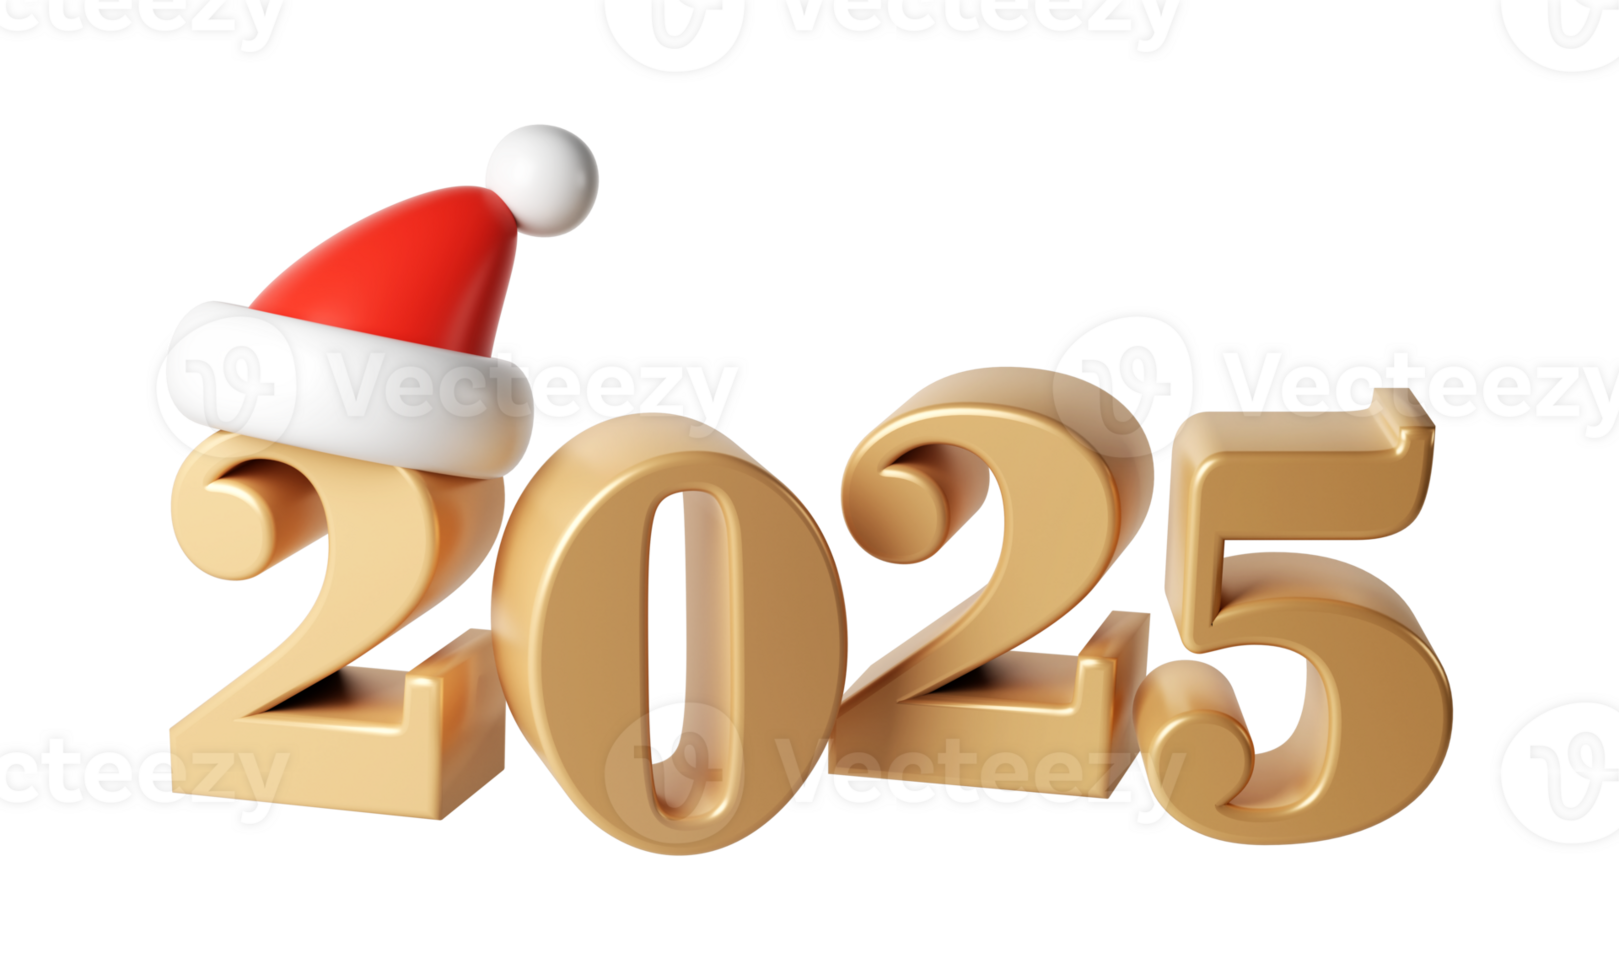 3d Happy New Year 2025 golden Numbers. Symbols cartoon render with red hat santa. Christmas decoration. Celebrate party Xmas Poster banner, cover card, brochure, flyer, layout design png